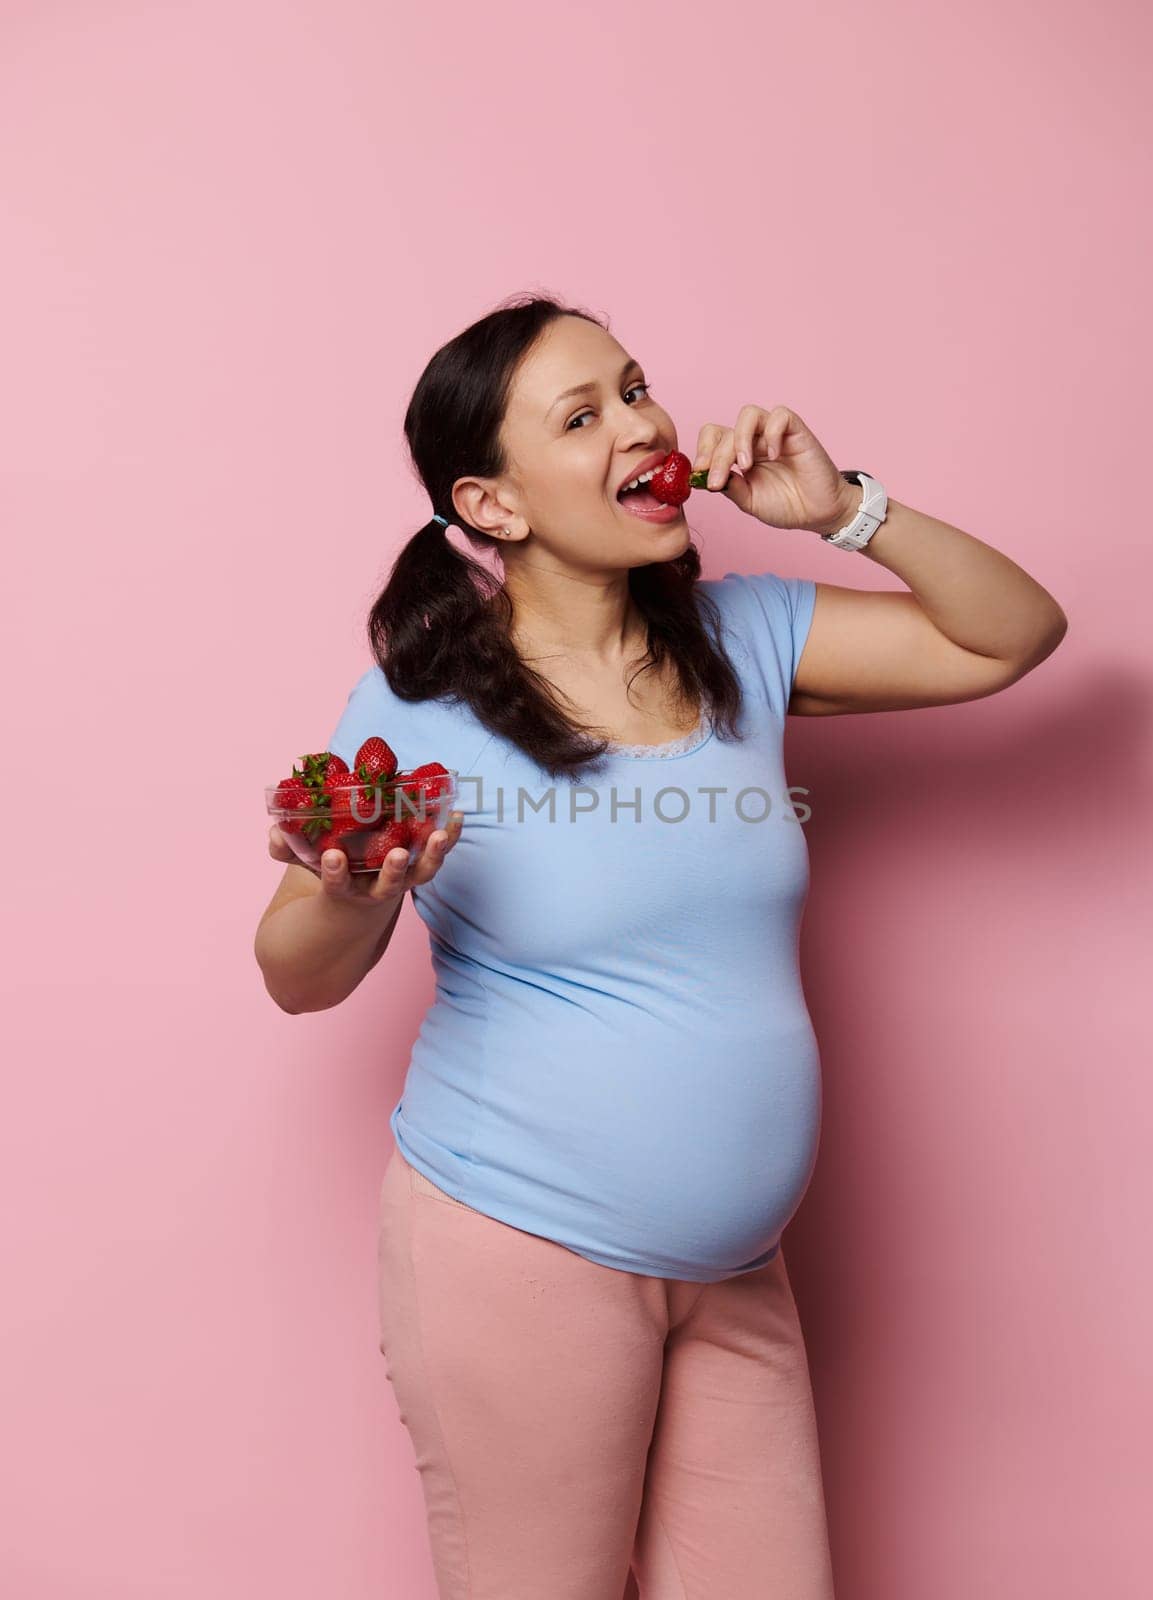 Gorgeous pregnant woman eating fresh organic strawberries, isolated over pink background. Expectant mother in blue t-shirt, holding bowl with fresh berries. Healthy nutrition and pregnancy concept.